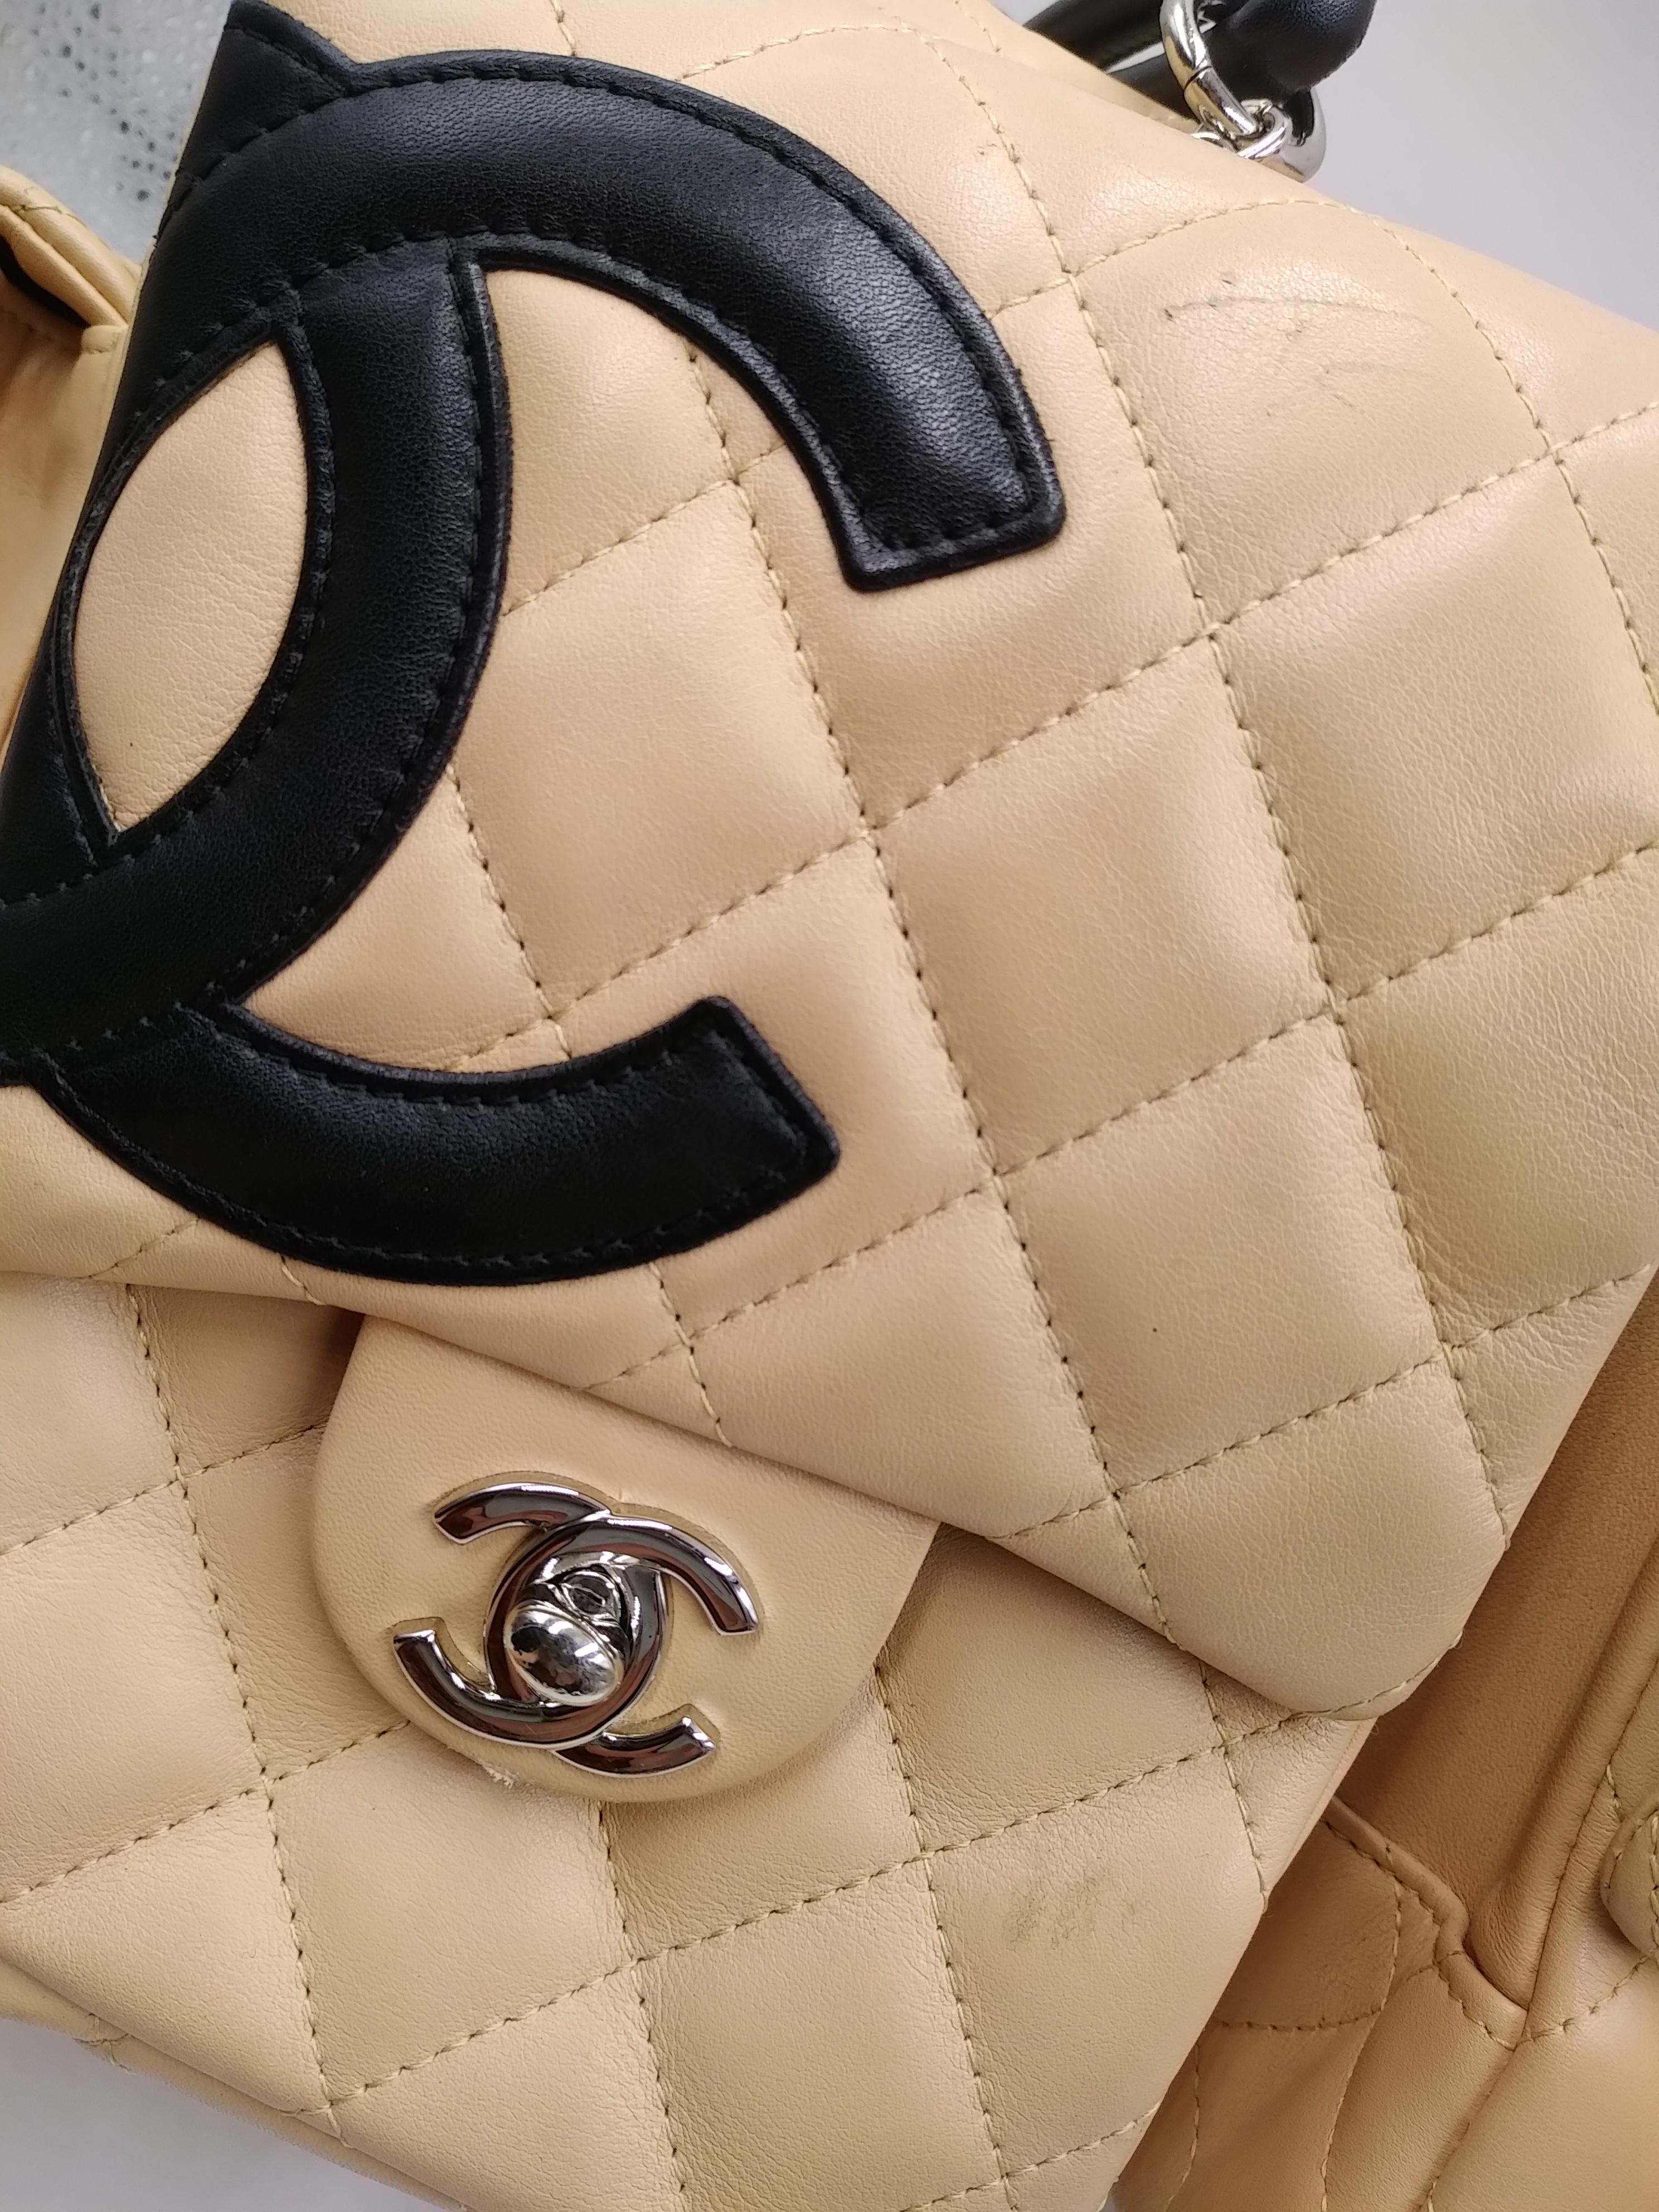 Chanel Beige/Black Quilted Leather Ligne Cambon Reporter Bag, 2004/2005
- 100% authentic Chanel
- Beige quilted leather
- Four flap top pockets and one flat rear pocket outside
- Double rolled leather handles
- Single zip closure
- Fine textile